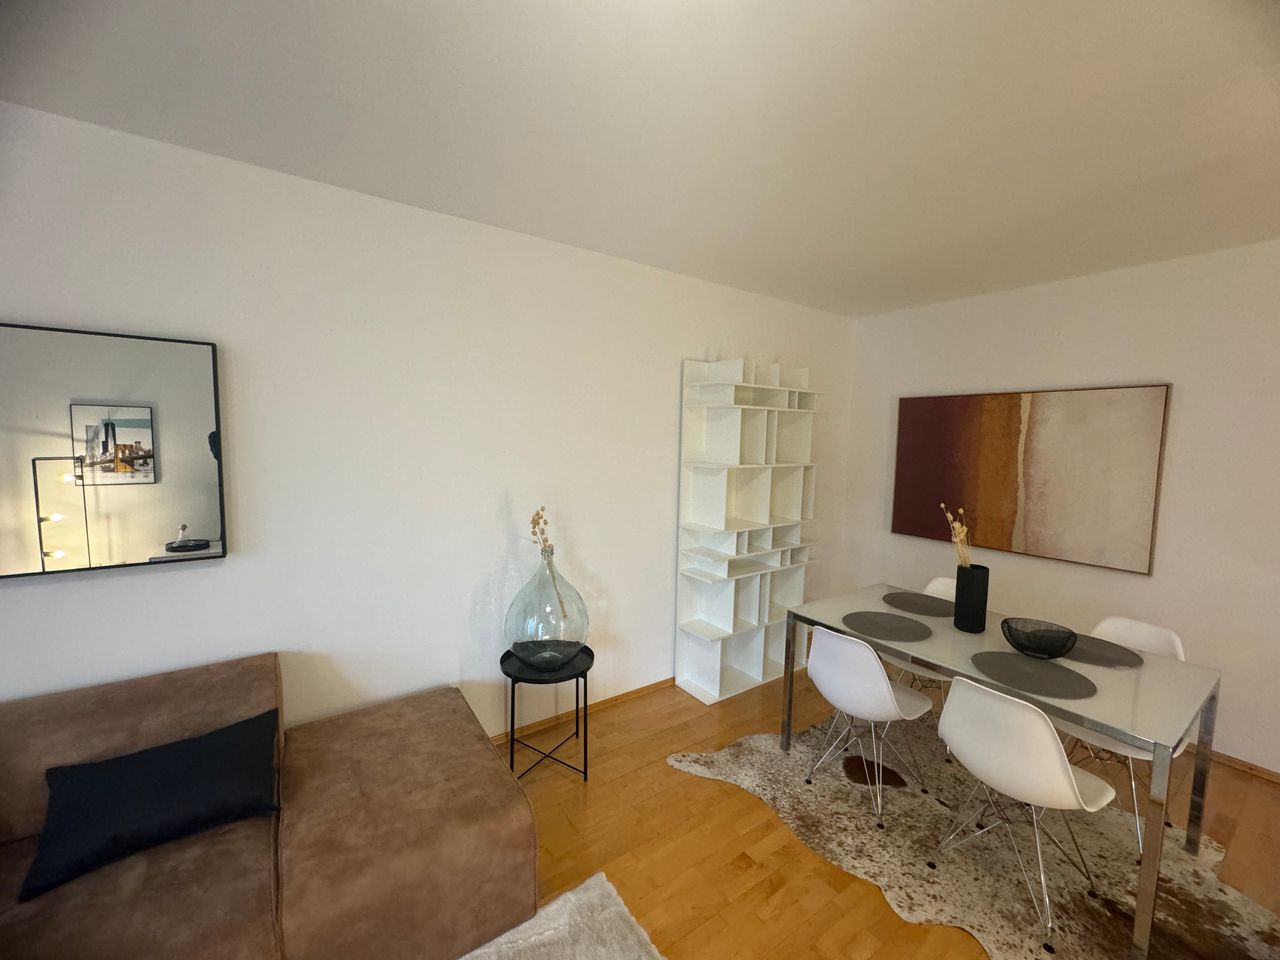 Nice apartment located in München Pasing